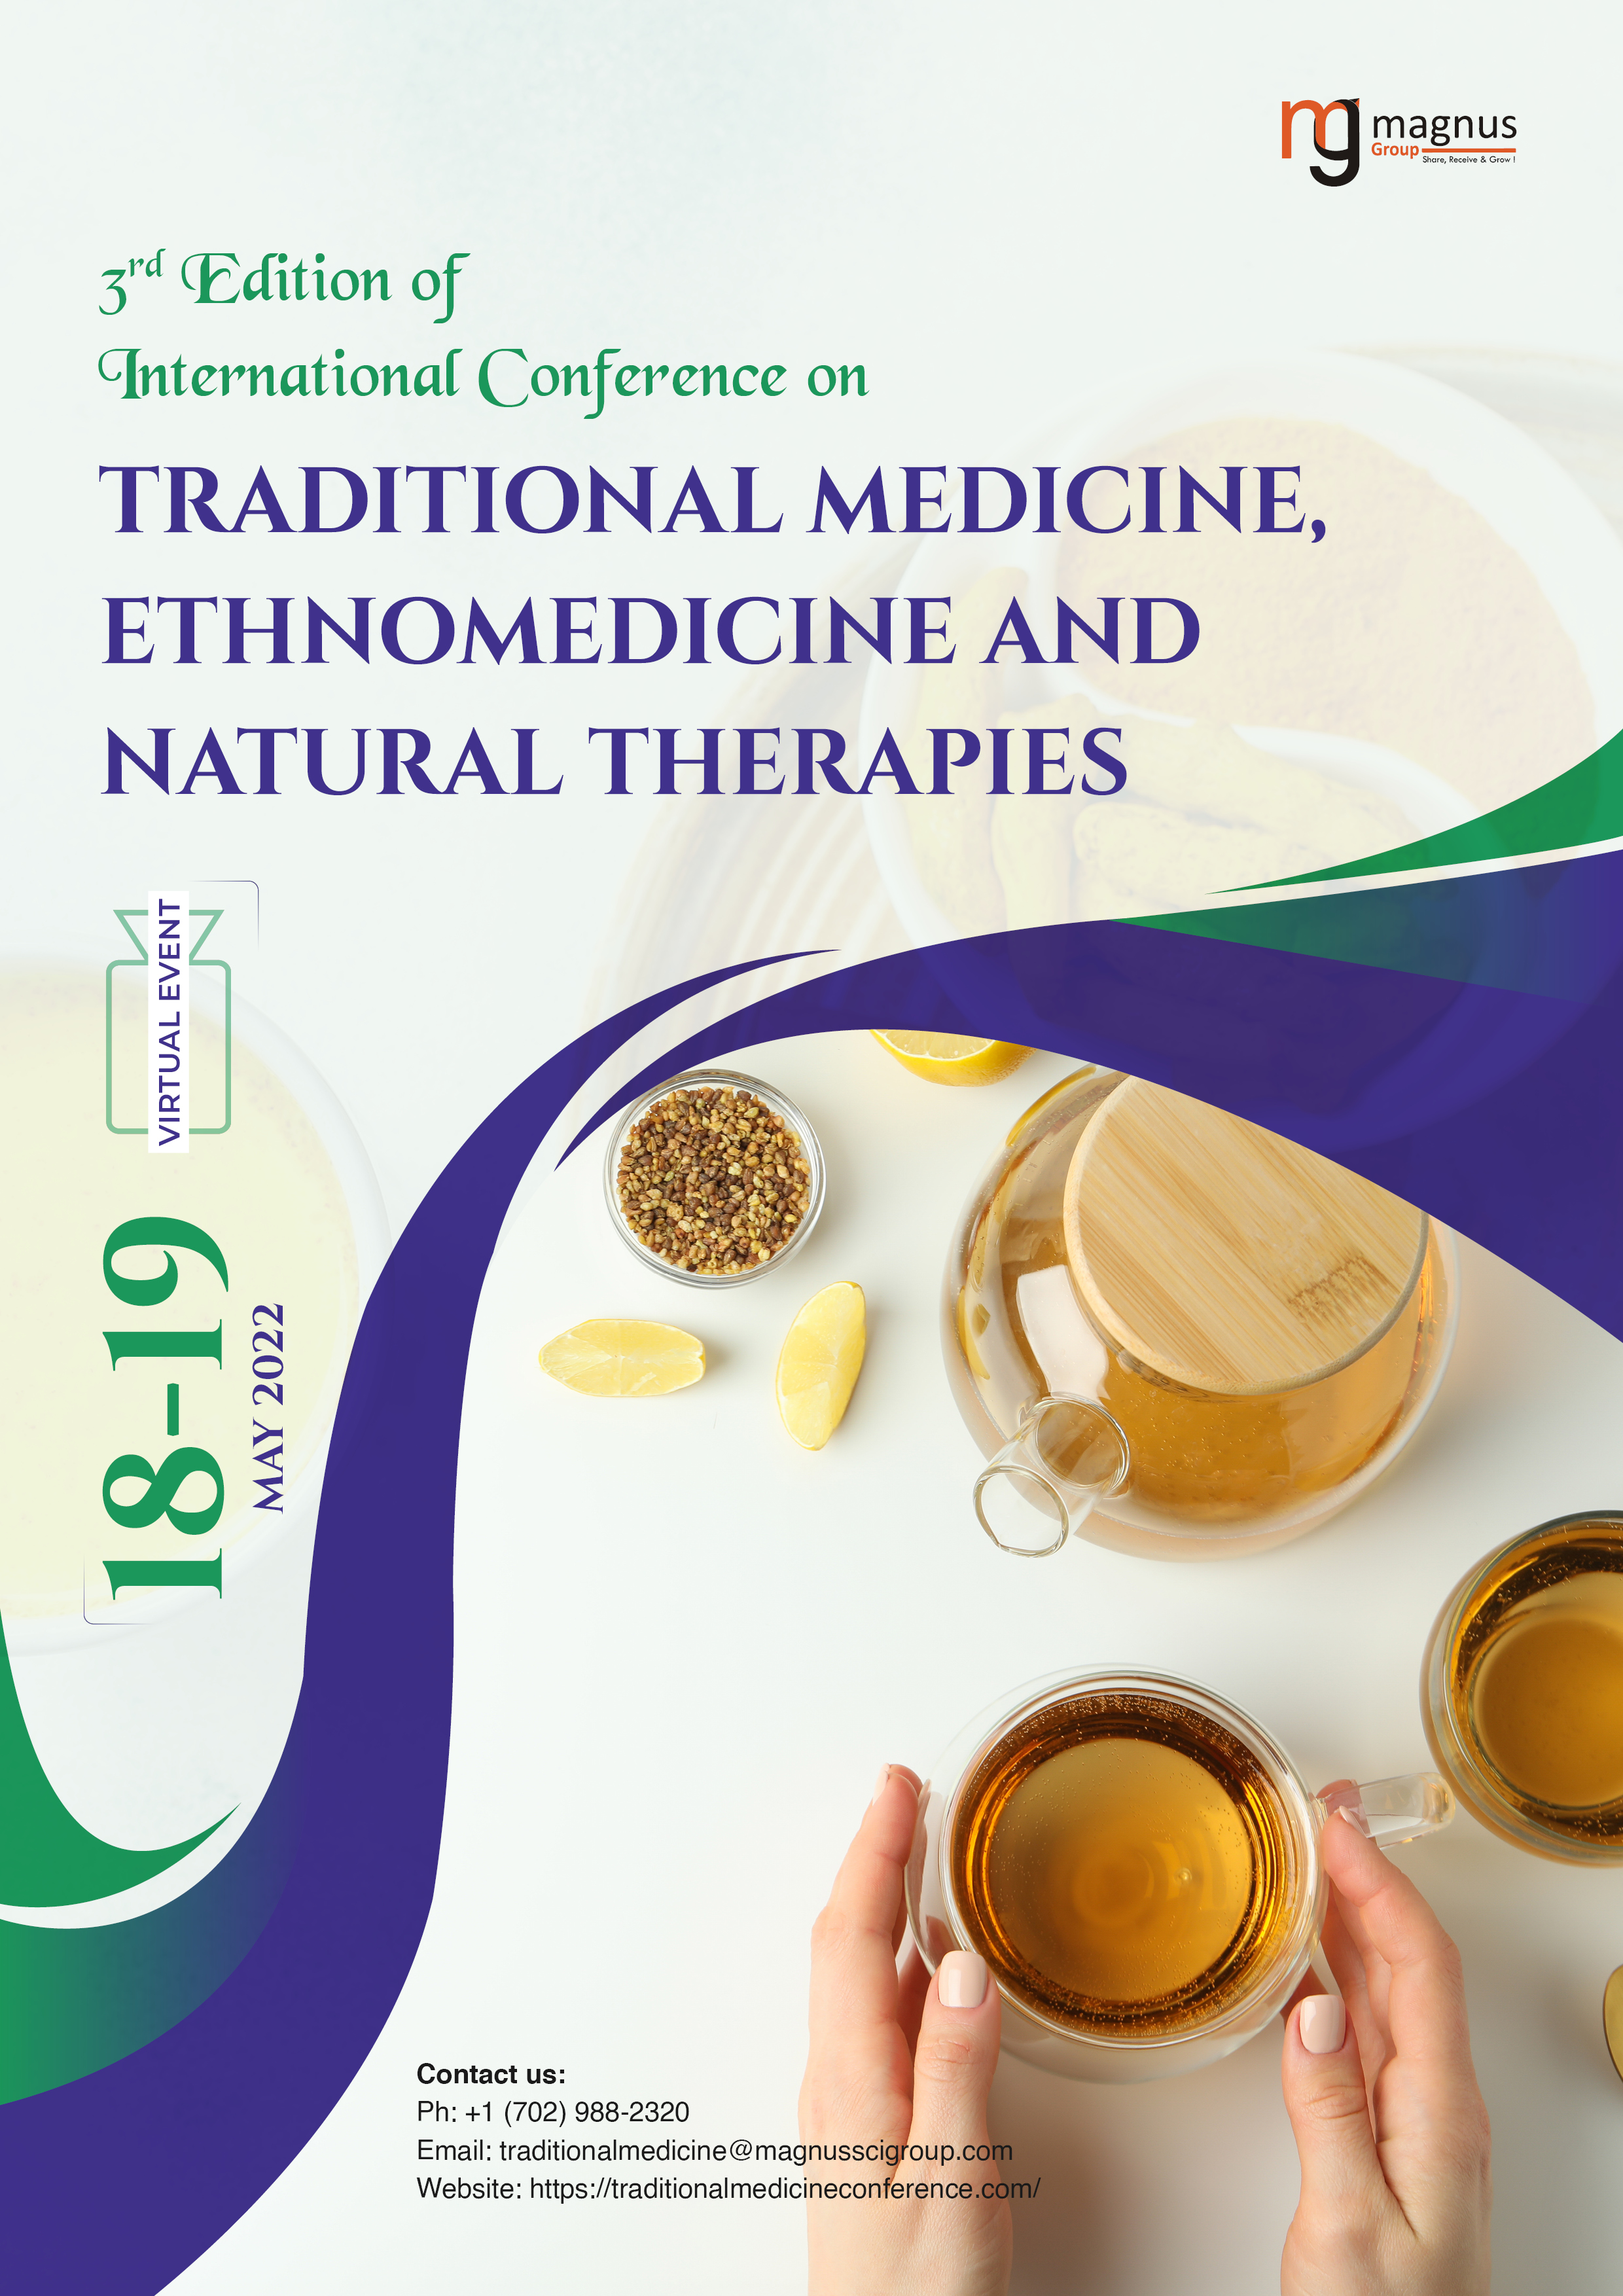 3rd Edition of International Conference on Traditional Medicine, Ethnomedicine and Natural Therapies | Online Event Program